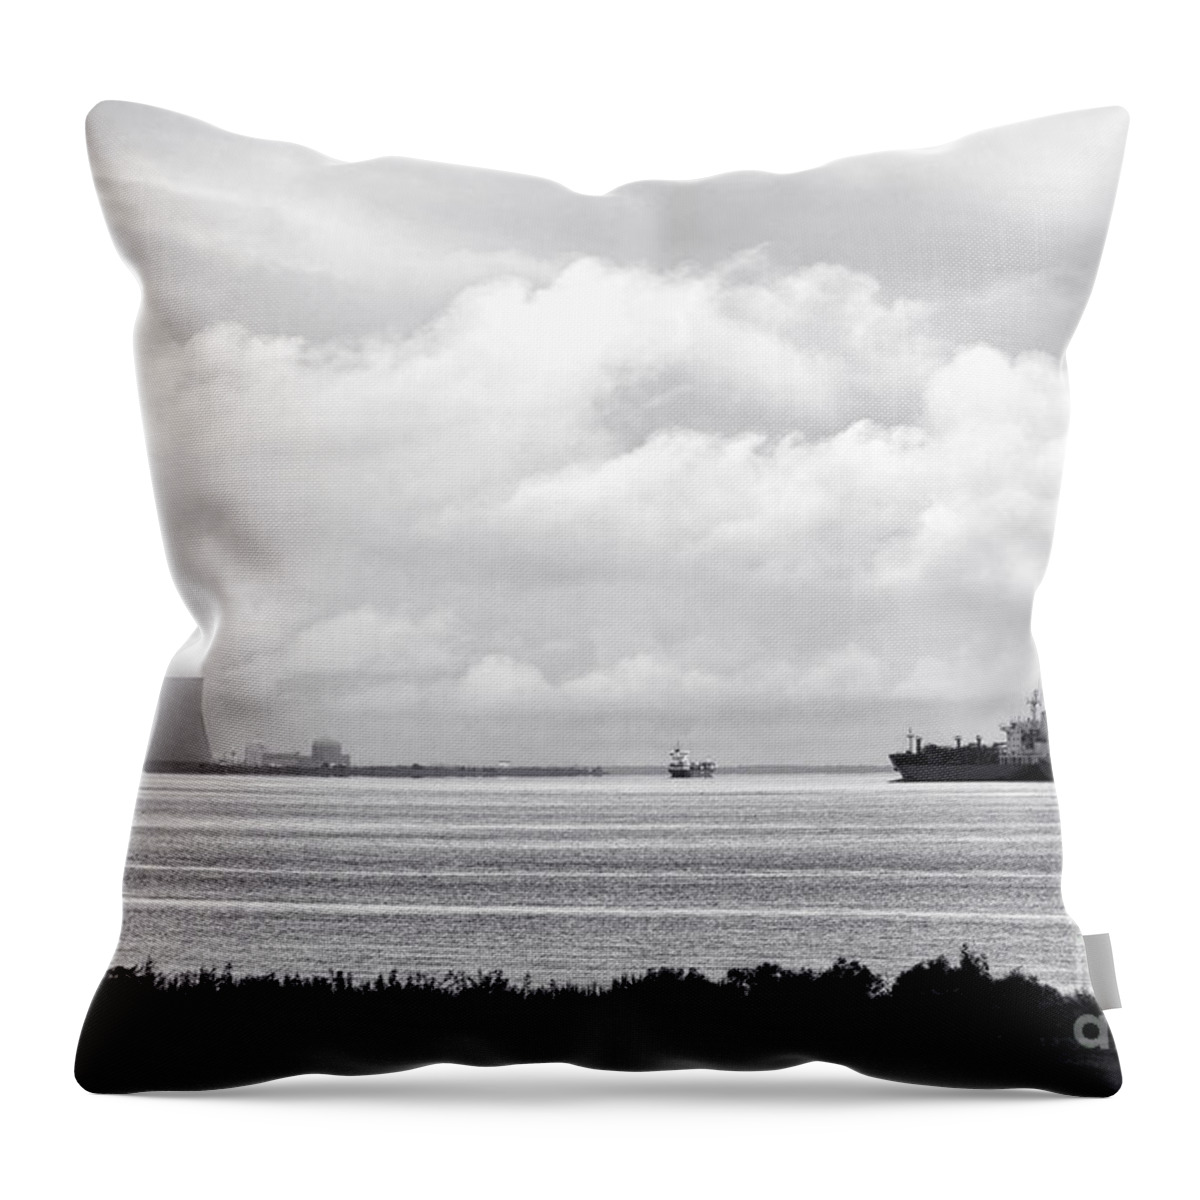 Tankers Throw Pillow featuring the photograph Energies by Olivier Le Queinec